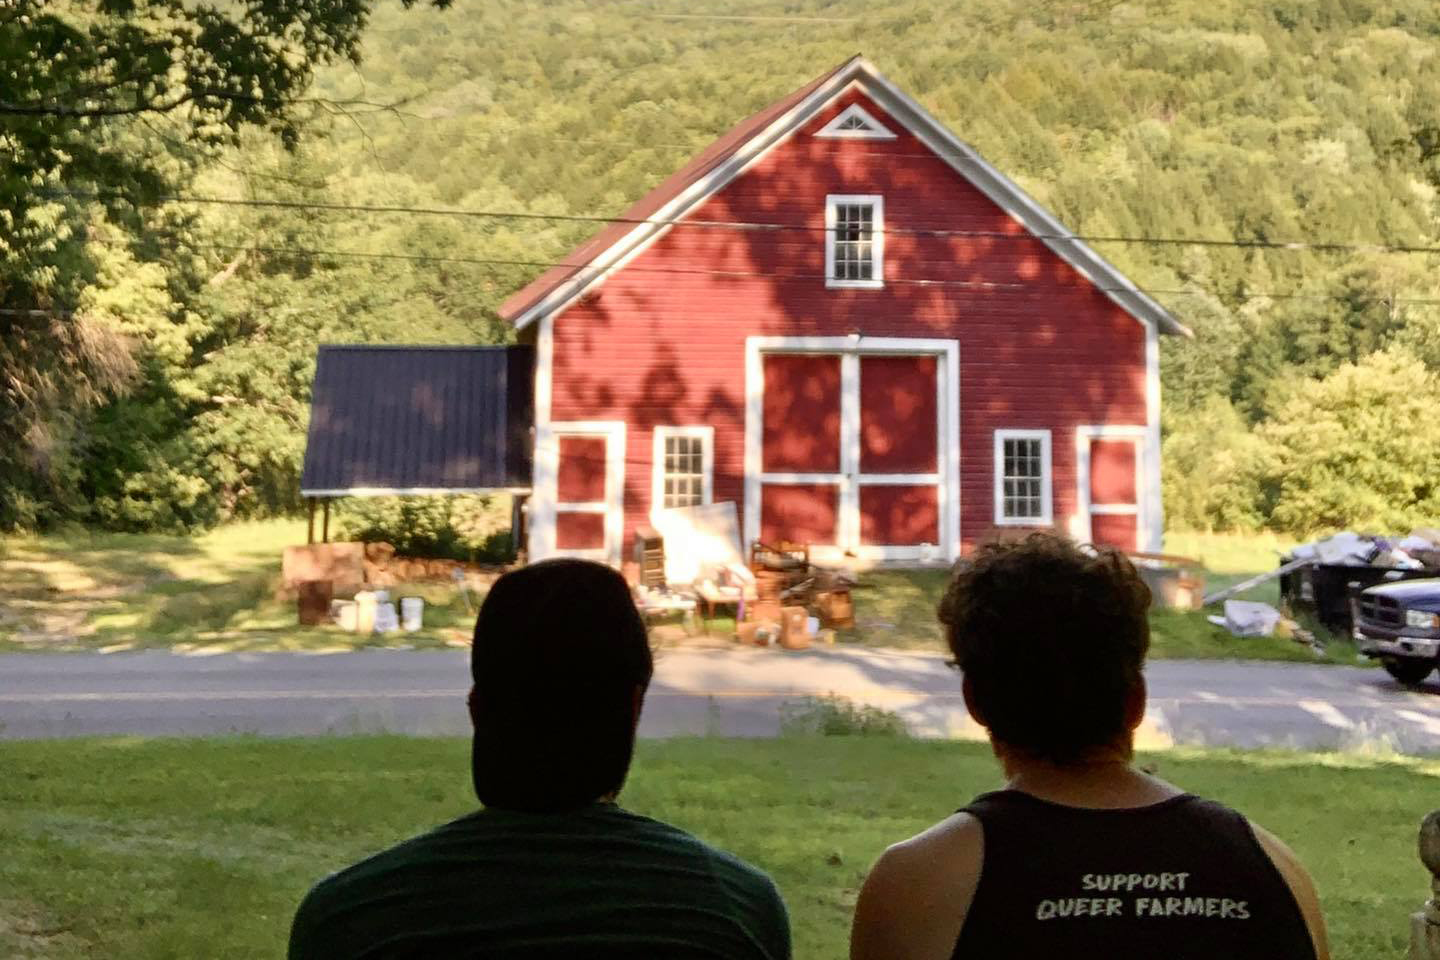 Two figures from the back, looking at a red barn. One of the figures has 'support queer farmers' on the back of their shirt